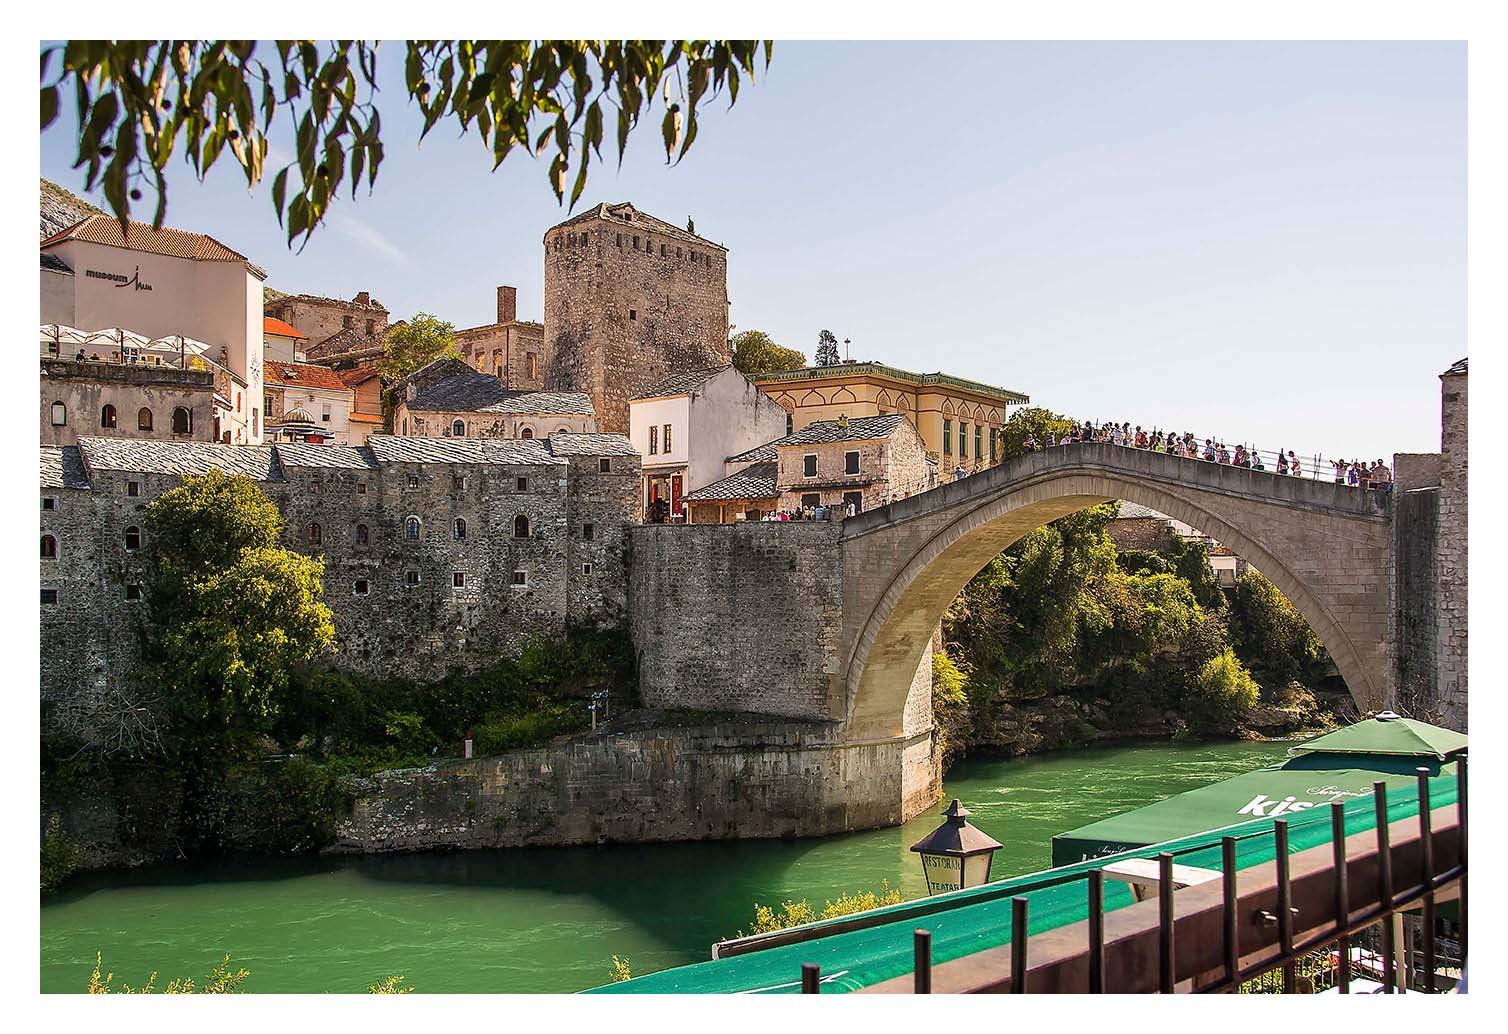 The charming old city of Mostar with its narrow cobbled streets and featuring the famous old bridge, built in the 16th century by the Ottomans, Destroyed in the war of 1993 and rebuilt in 2003-2004 and had a grand opening in July 2004.?